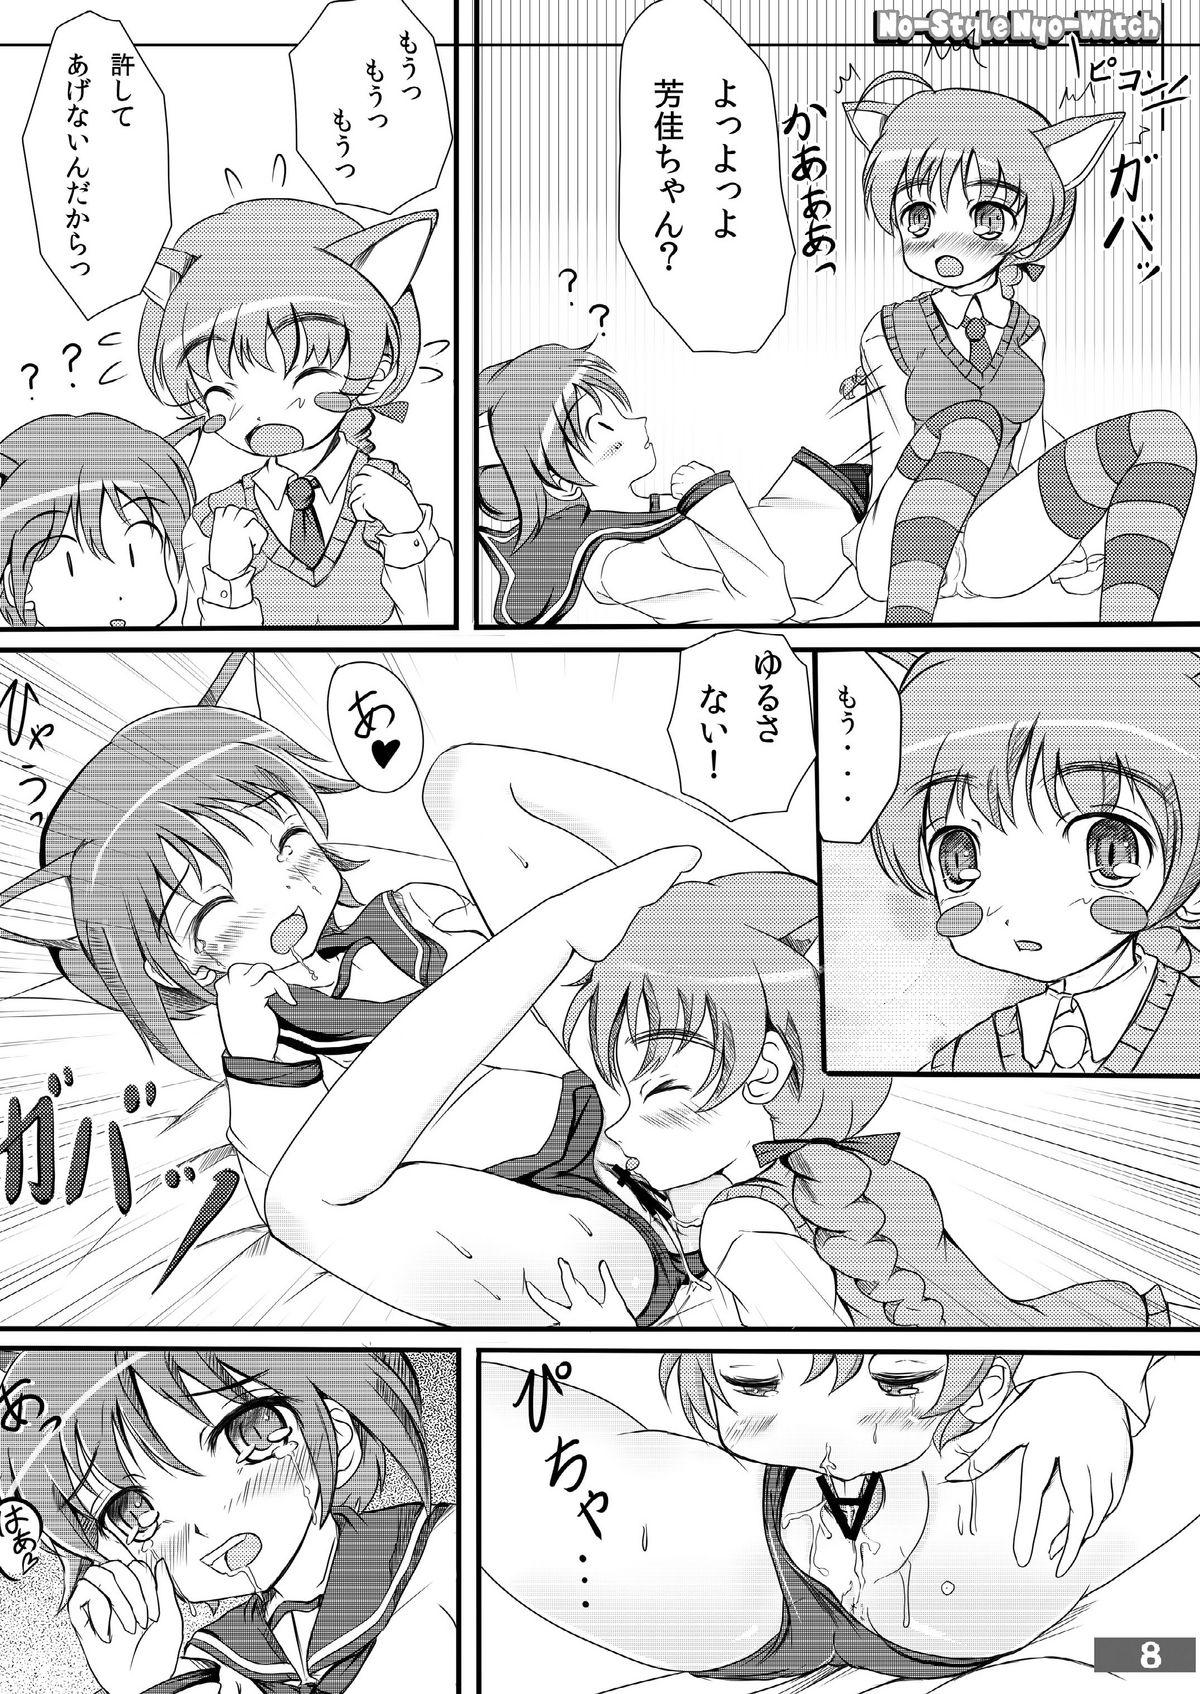 Spoon (C79) [kyabe's FACTORY (Kyabe Suke)] No-Style Nyo-Witch (Strike Witches) - Strike witches Gaystraight - Page 8